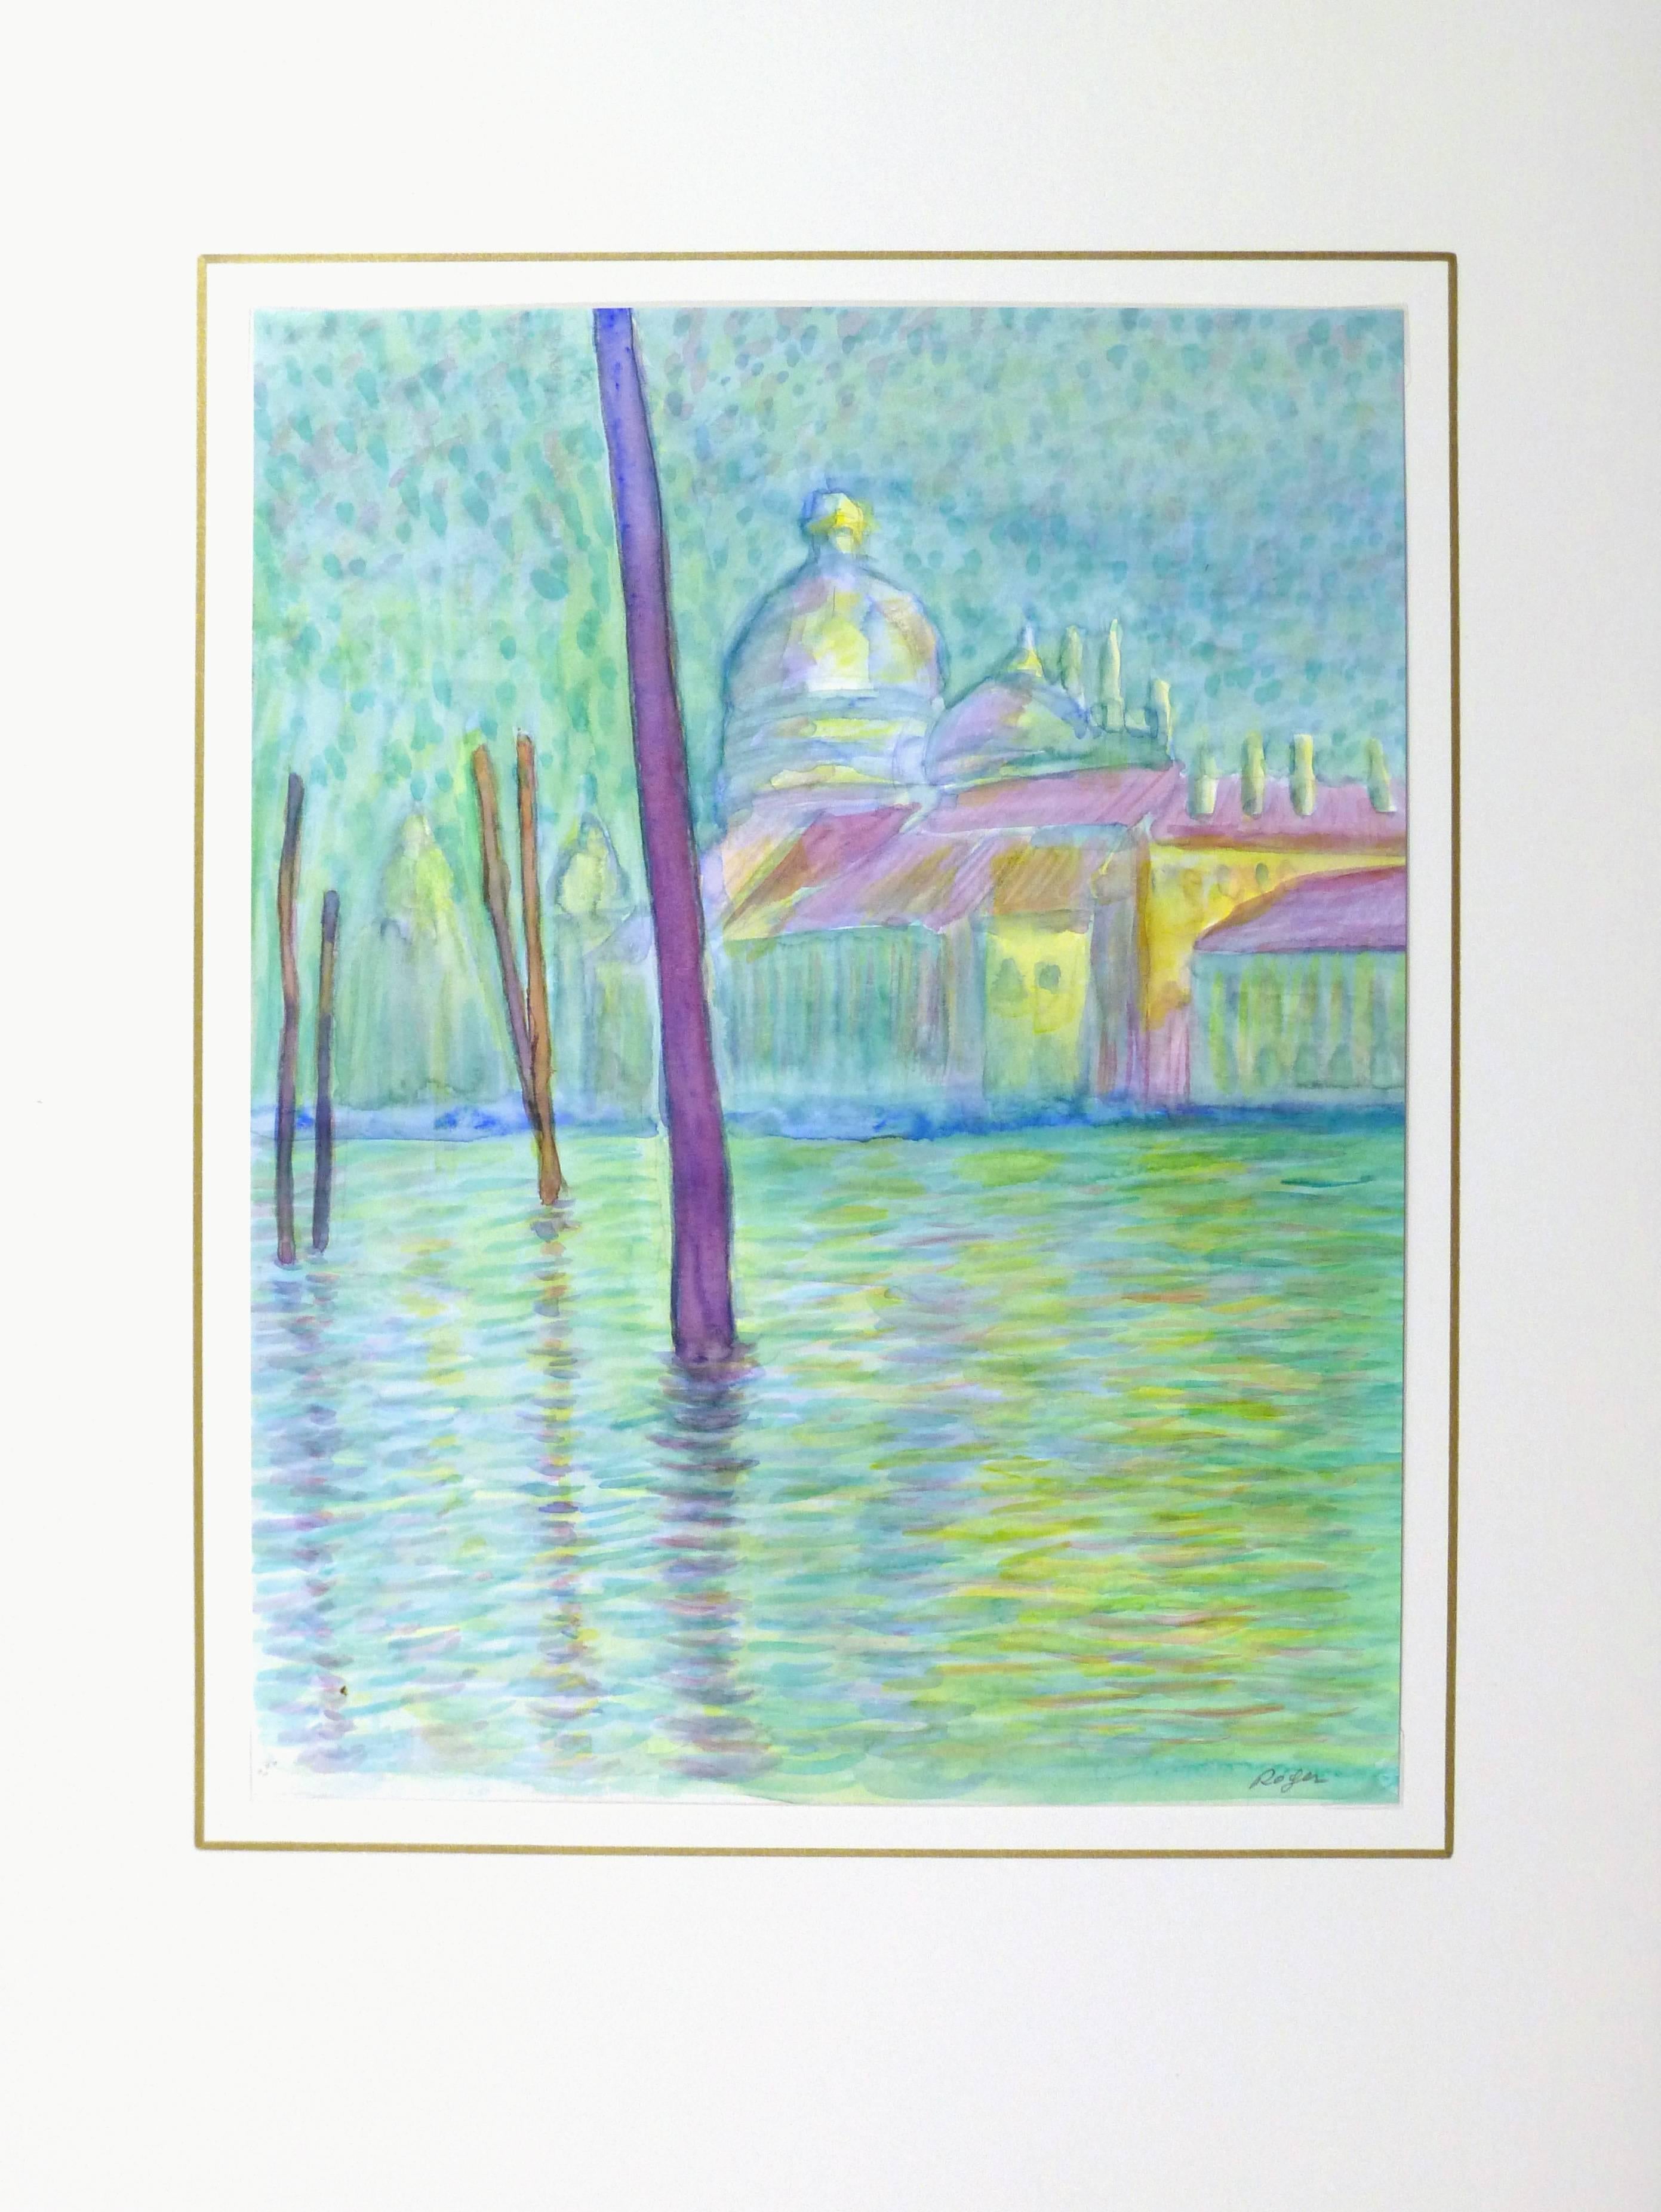 Impressionist style watercolor of a early evening scene along the canals of Venice, Italy, circa 1990. Signed lower right.

Original one-of-a-kind artwork on paper displayed on a white mat with a gold border. Mat fits a standard-size frame.